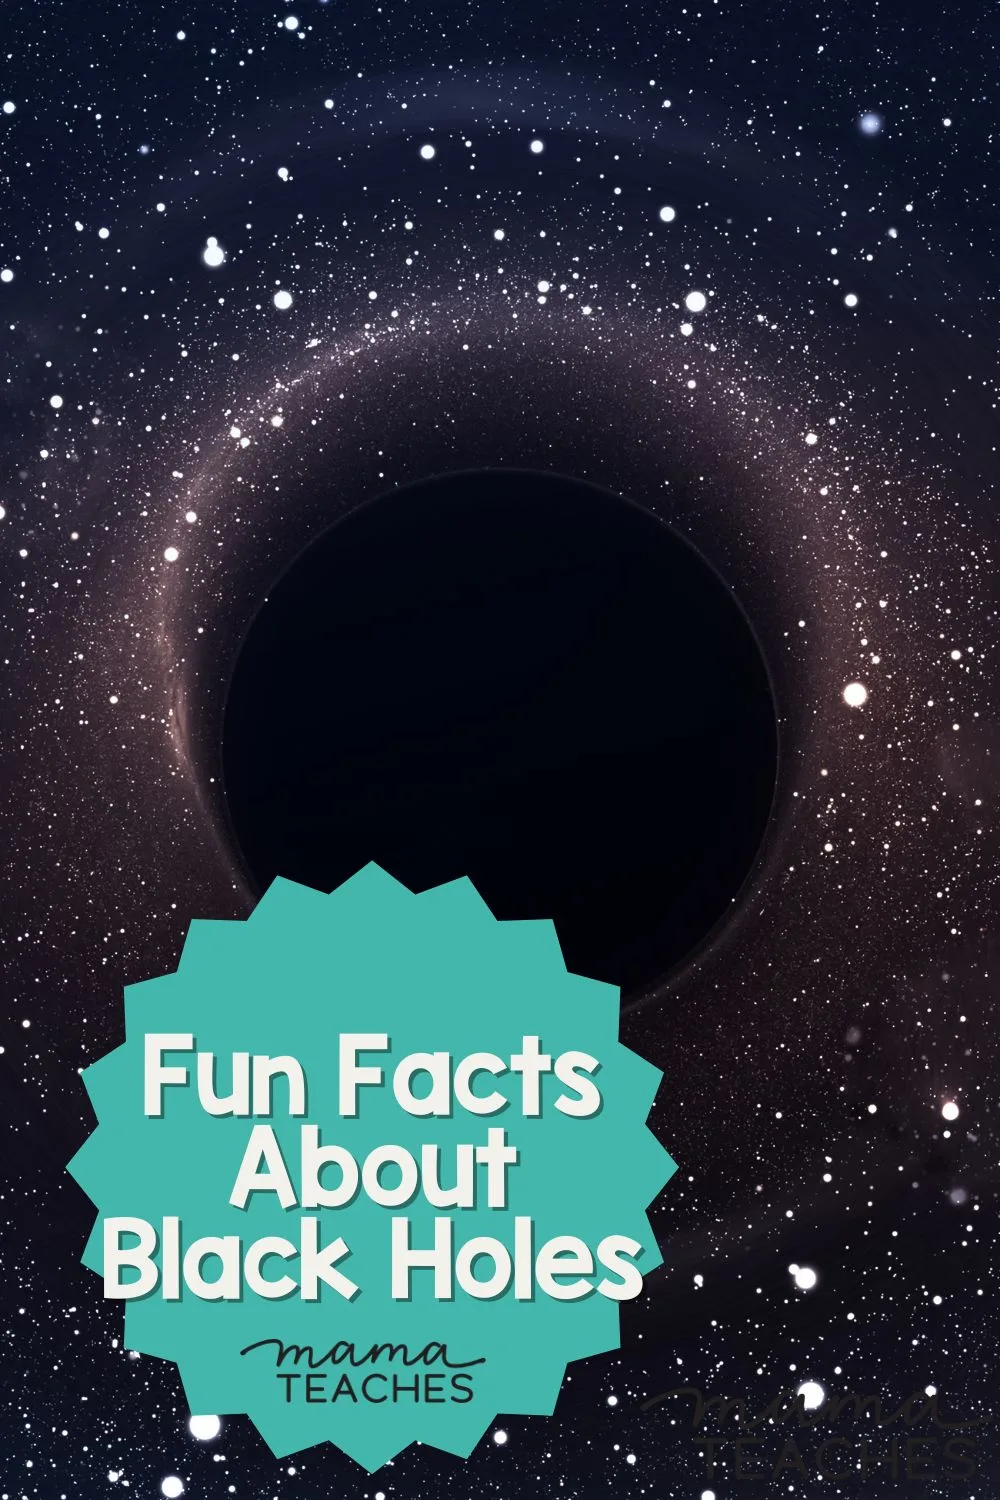 Fun Facts About Black Holes